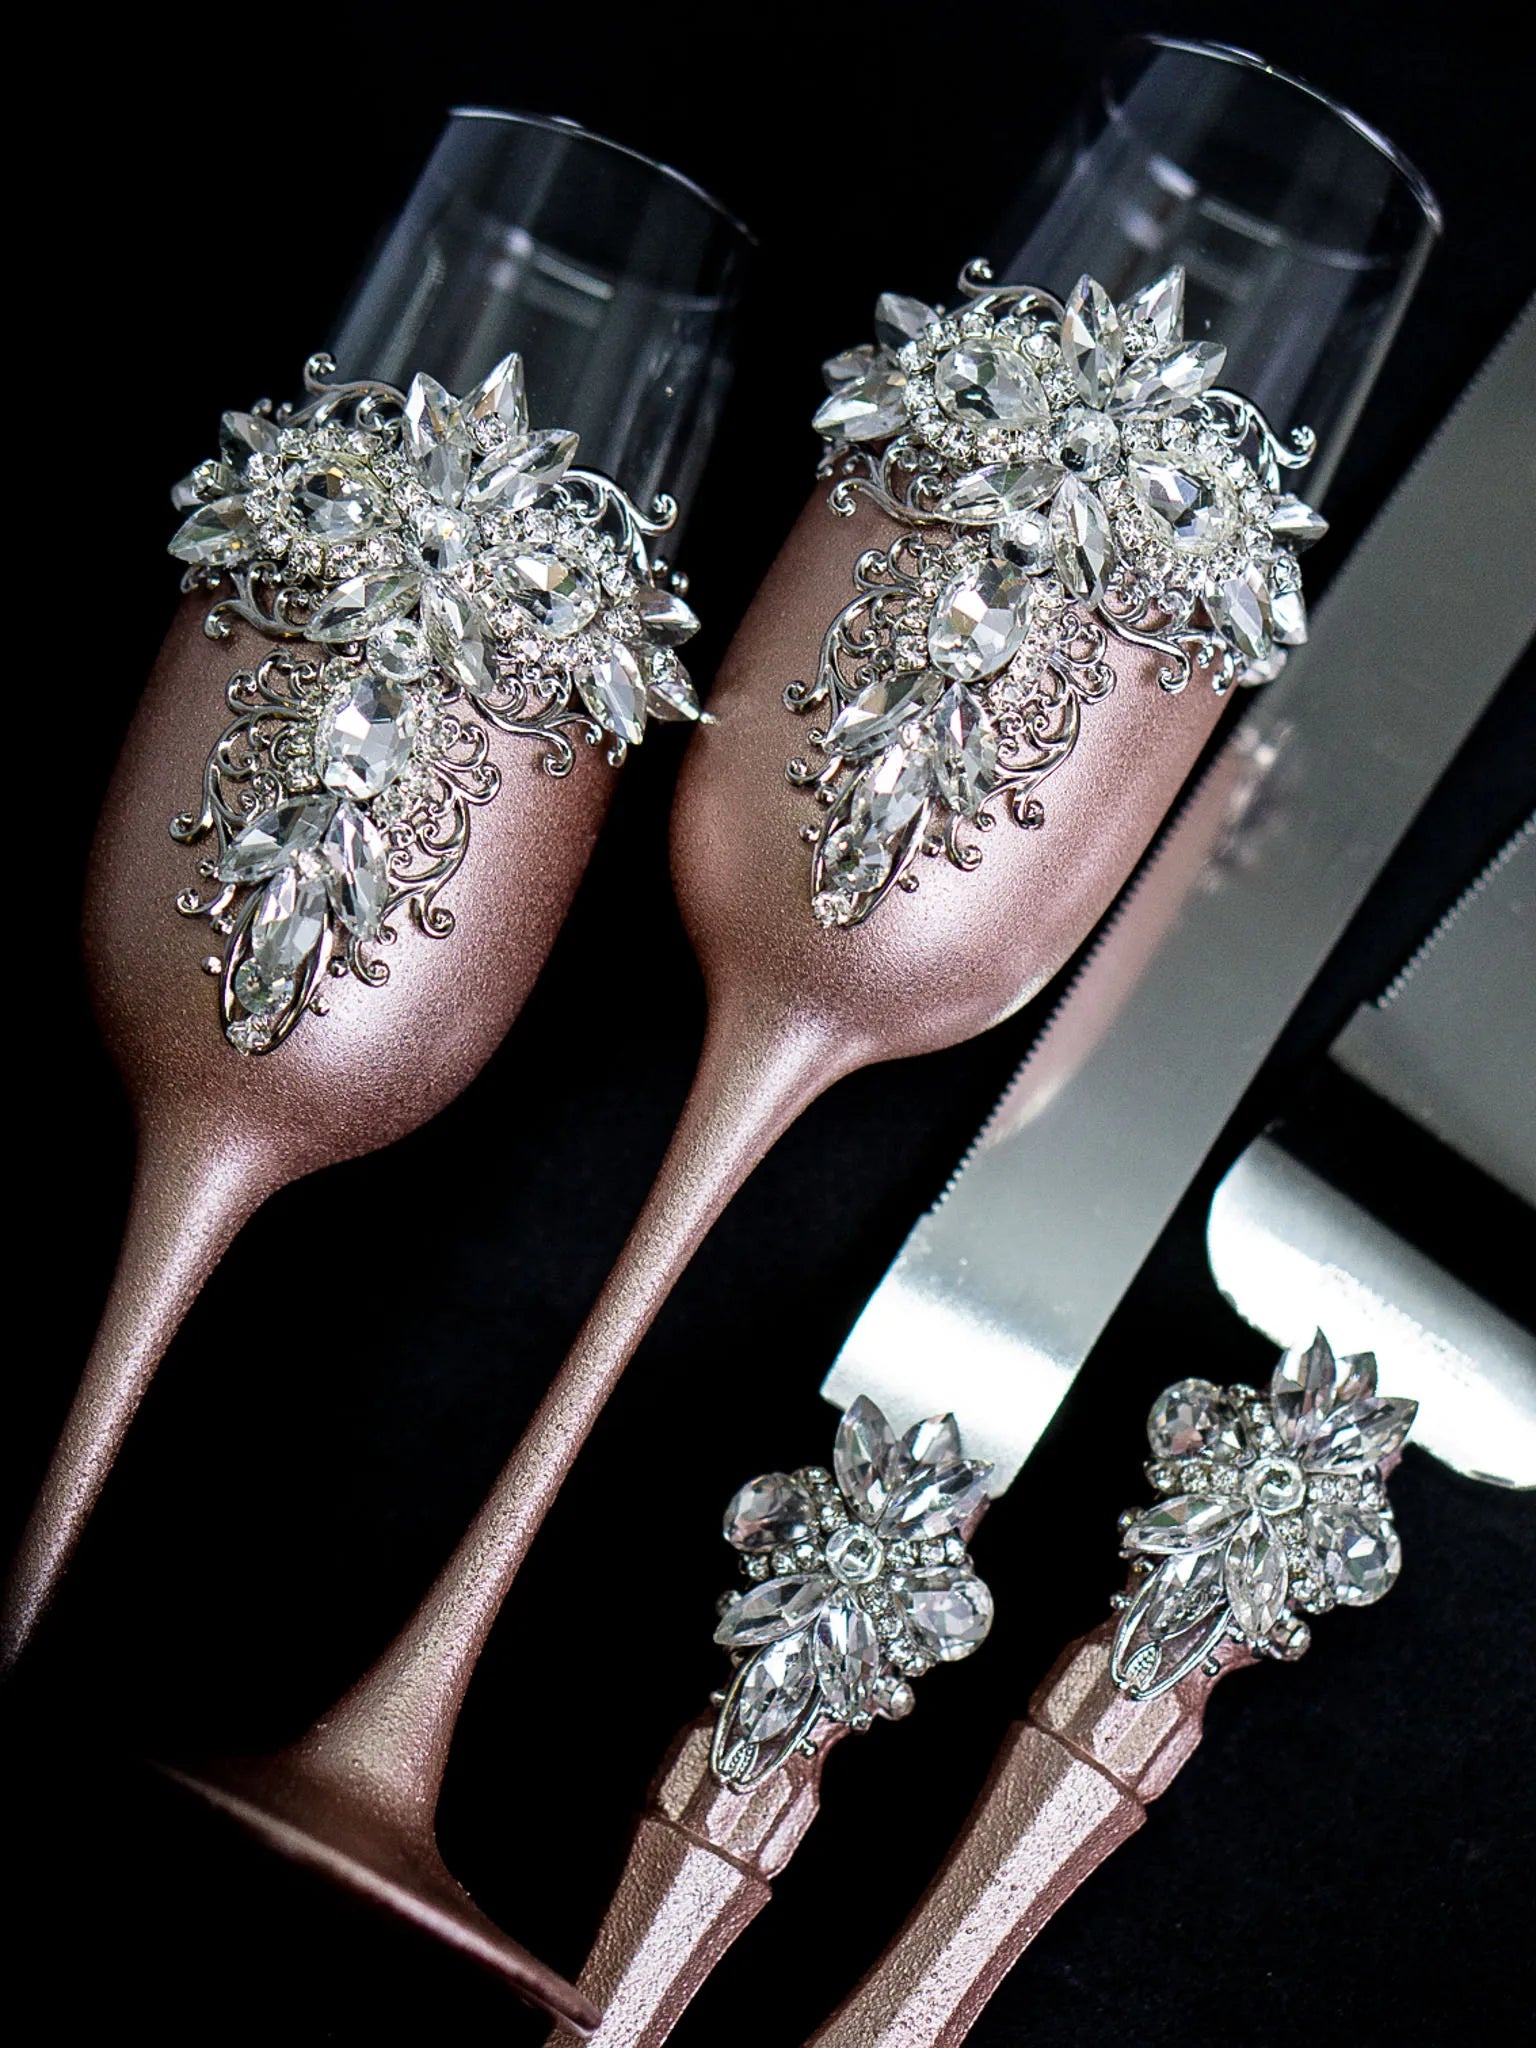 Engraved cake serving set with silver crystals